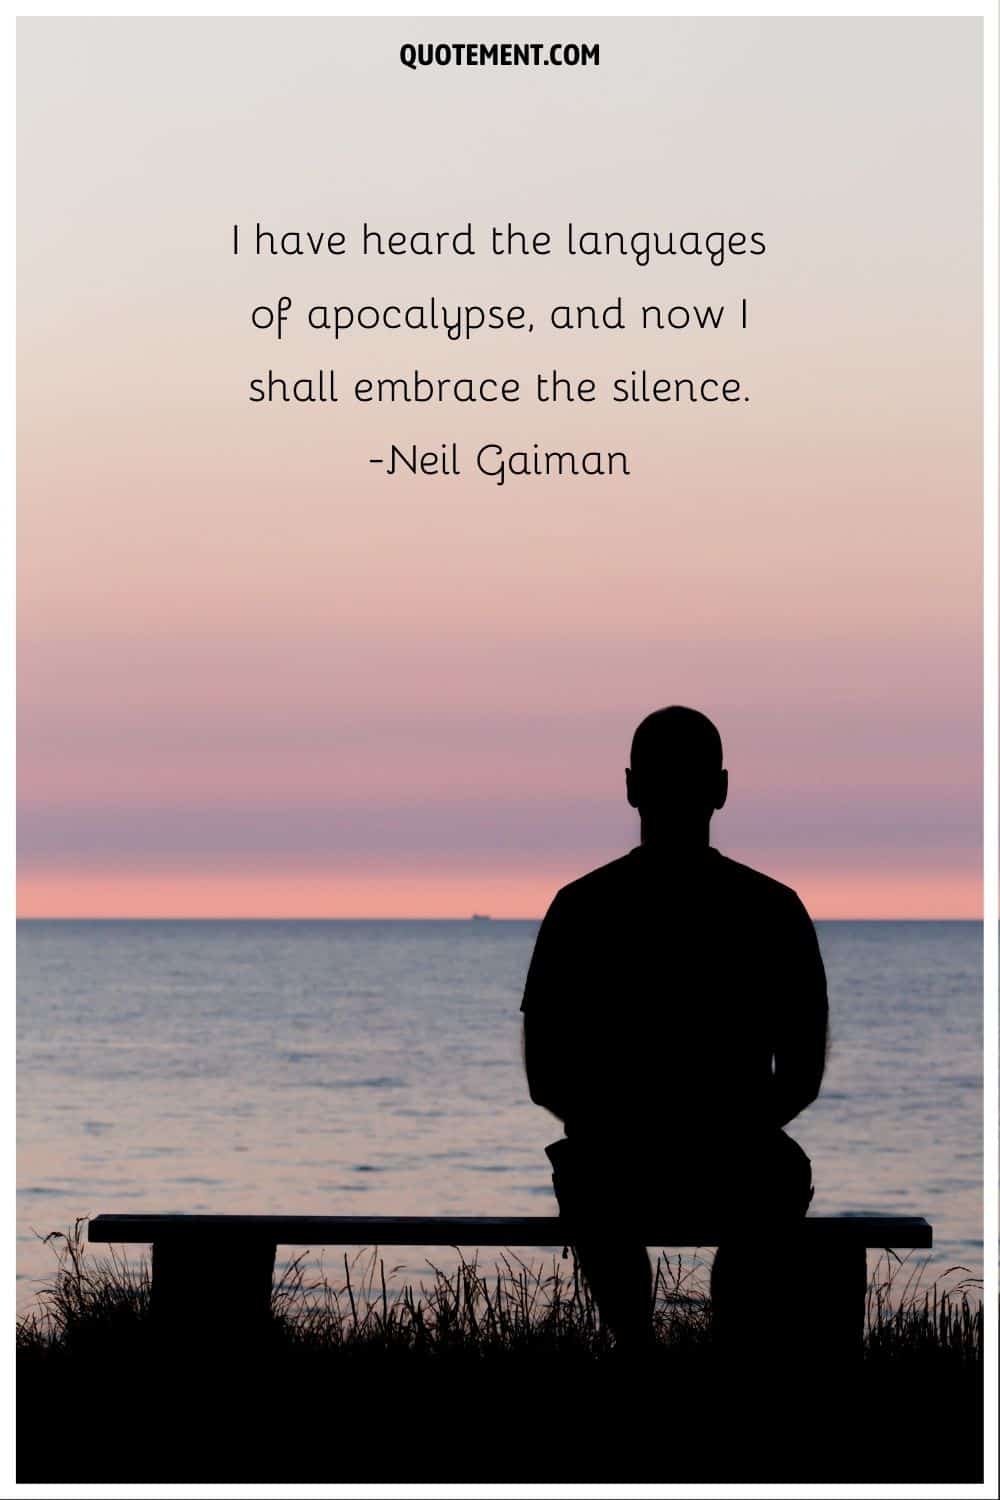 “I have heard the languages of apocalypse, and now I shall embrace the silence.” ― Neil Gaiman, The Sandman Endless Nights